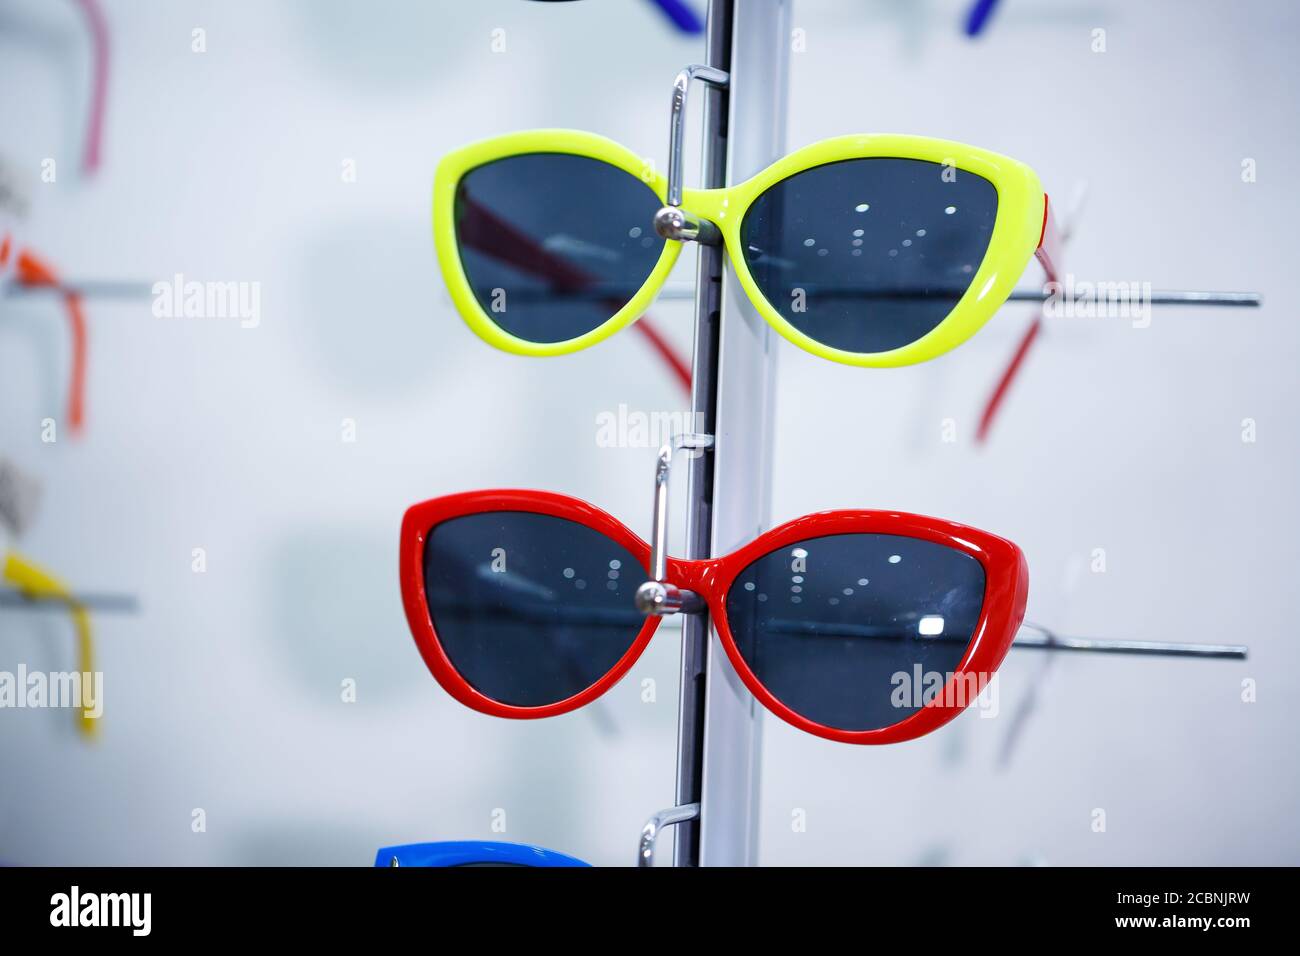 sunglasses with a colored frame for children Stock Photo